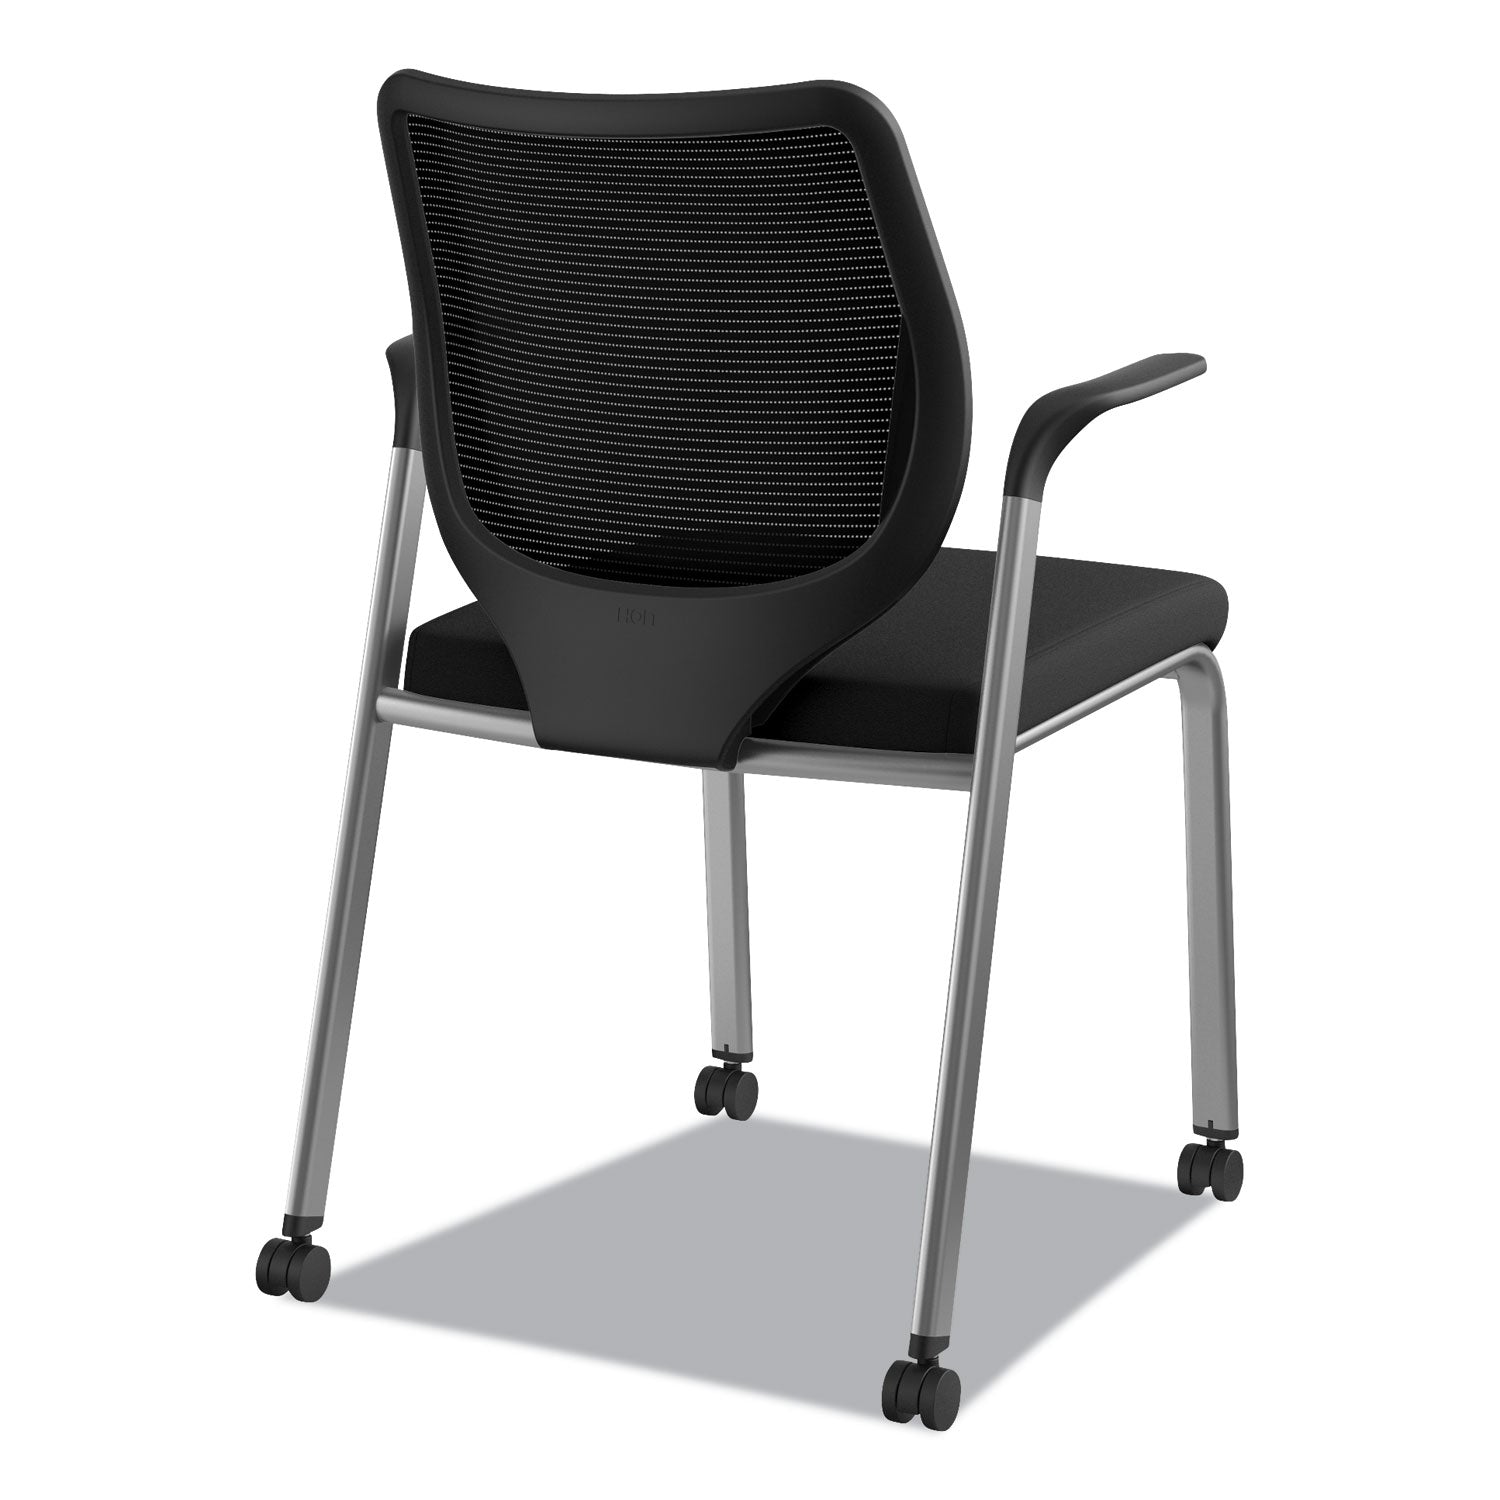 nucleus-series-multipurpose-stacking-chair-with-ilira-stretch-m4-back-supports-up-to-300-lb-black-seat-back-platinum-base_honn606hcu10t1 - 6